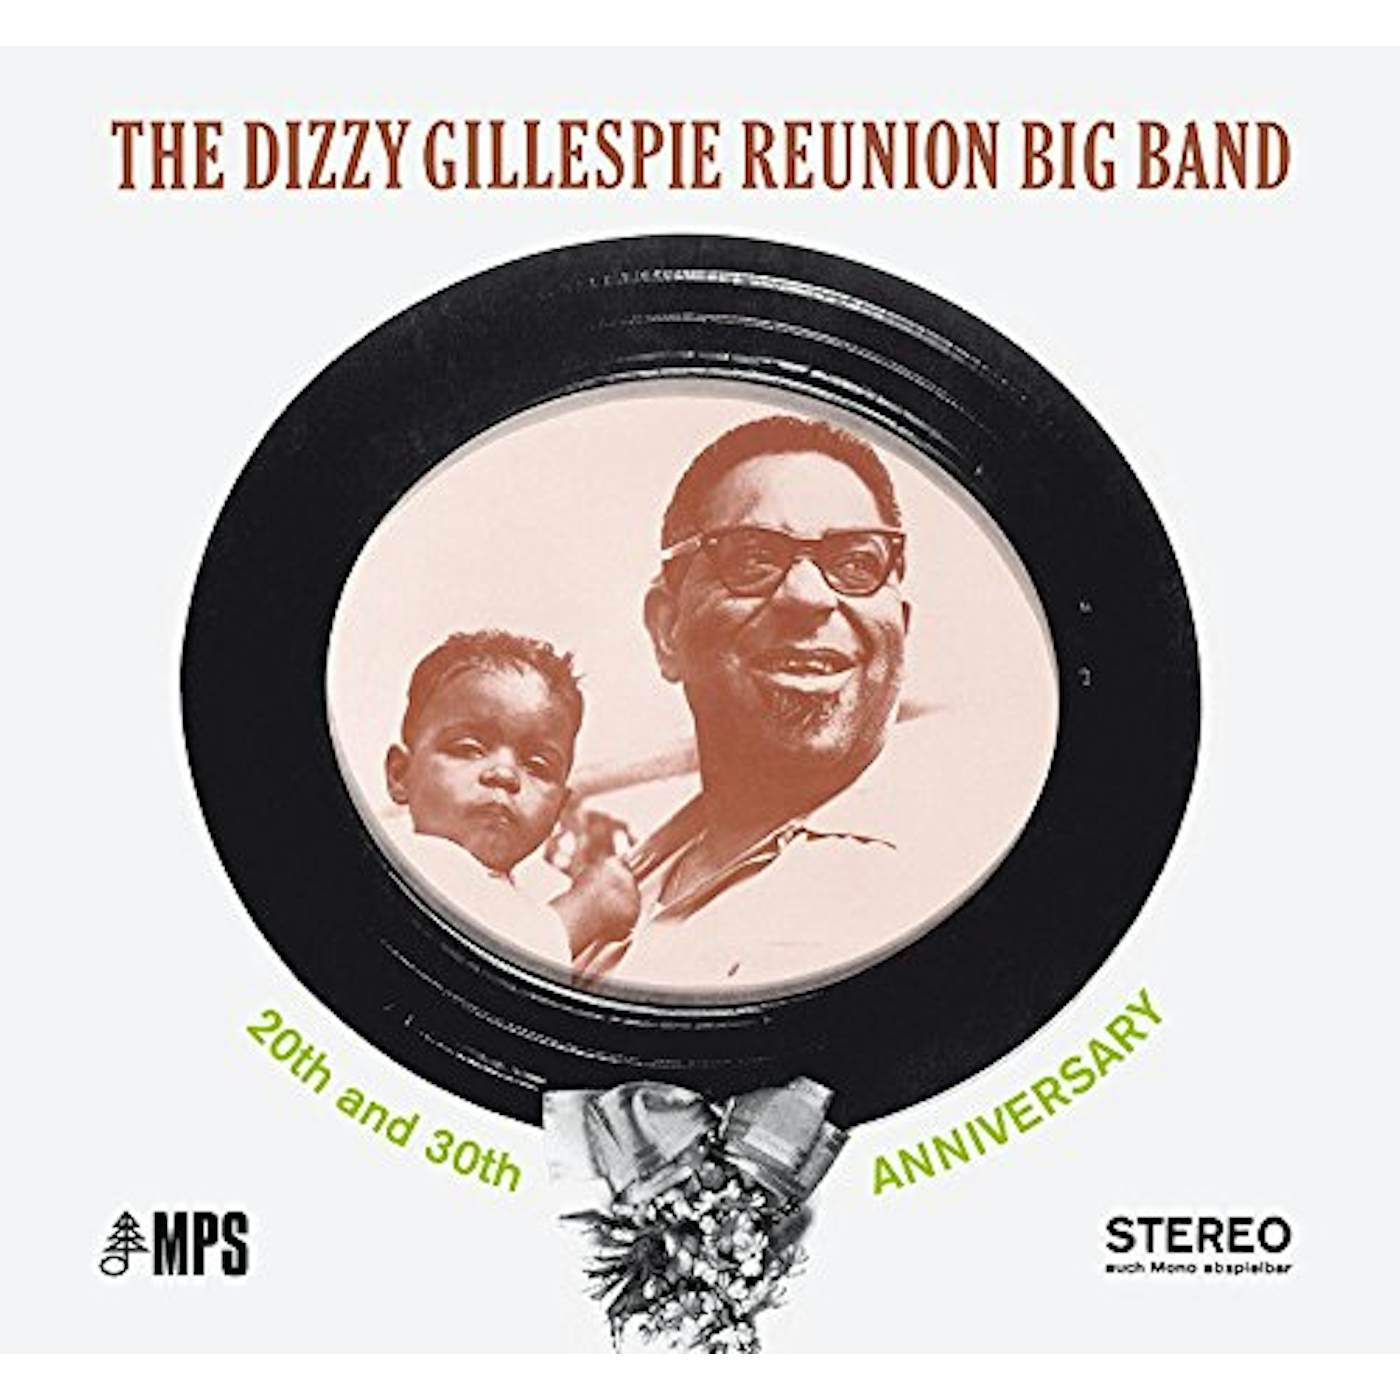 Dizzy Gillespie 20th and 30th Anniversary Vinyl Record